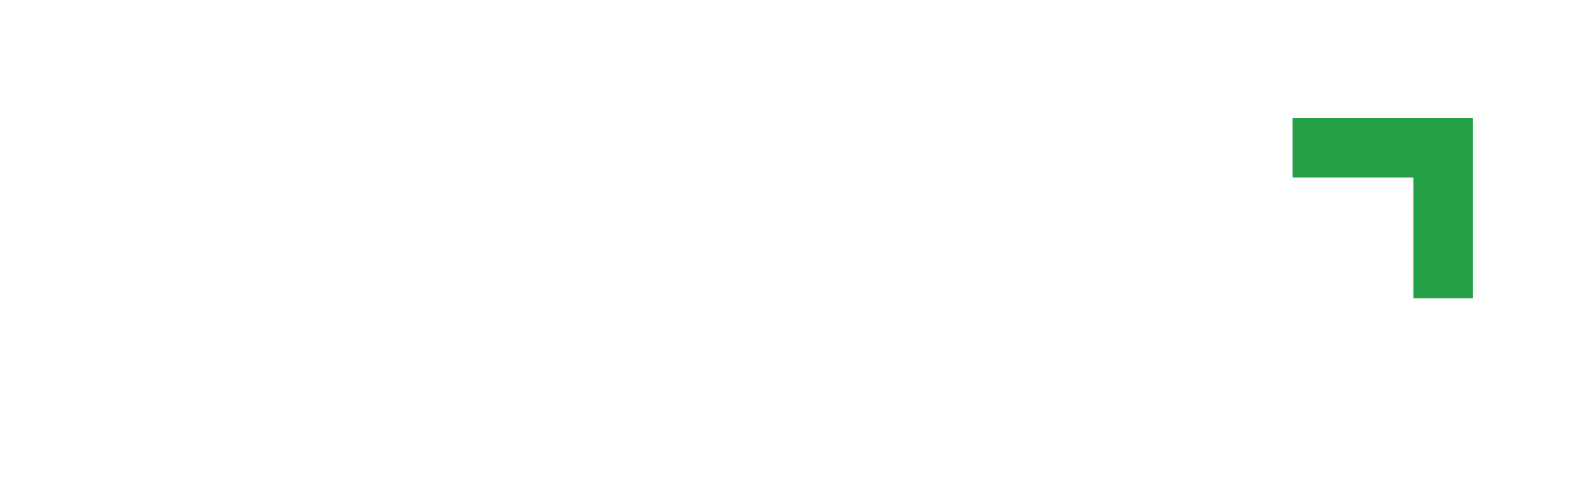 Jazan Development and Investment (JAZADCO)  logo large for dark backgrounds (transparent PNG)